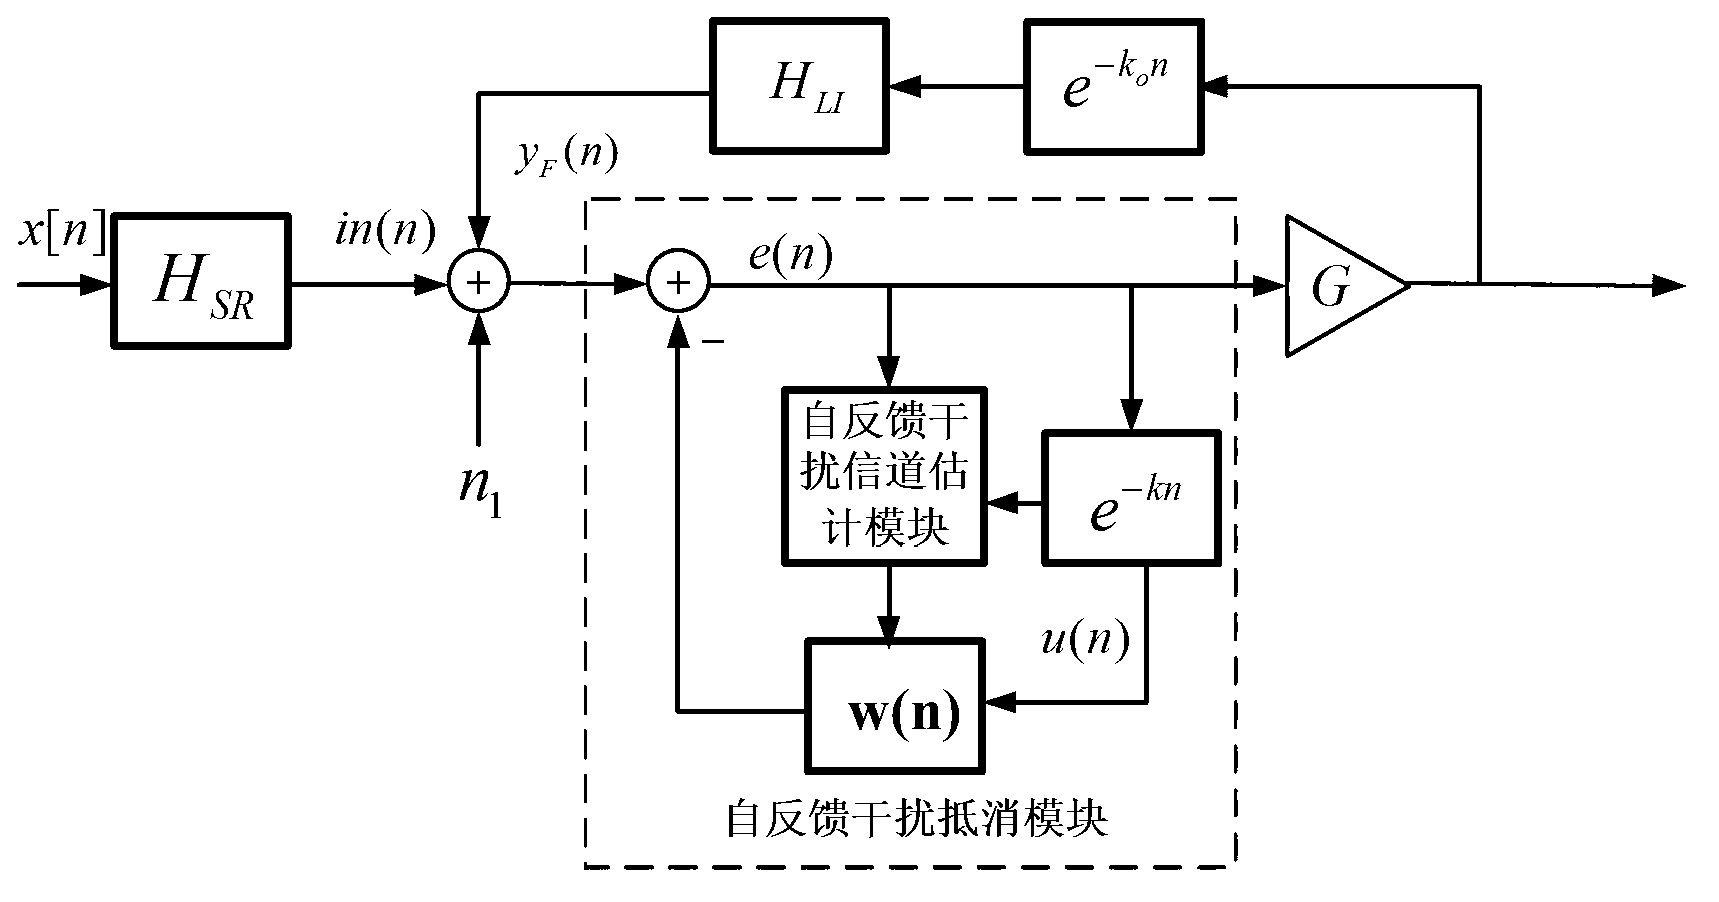 Self-feedback interference time domain suppression method in co-channel full duplex SISO (single input single output) system